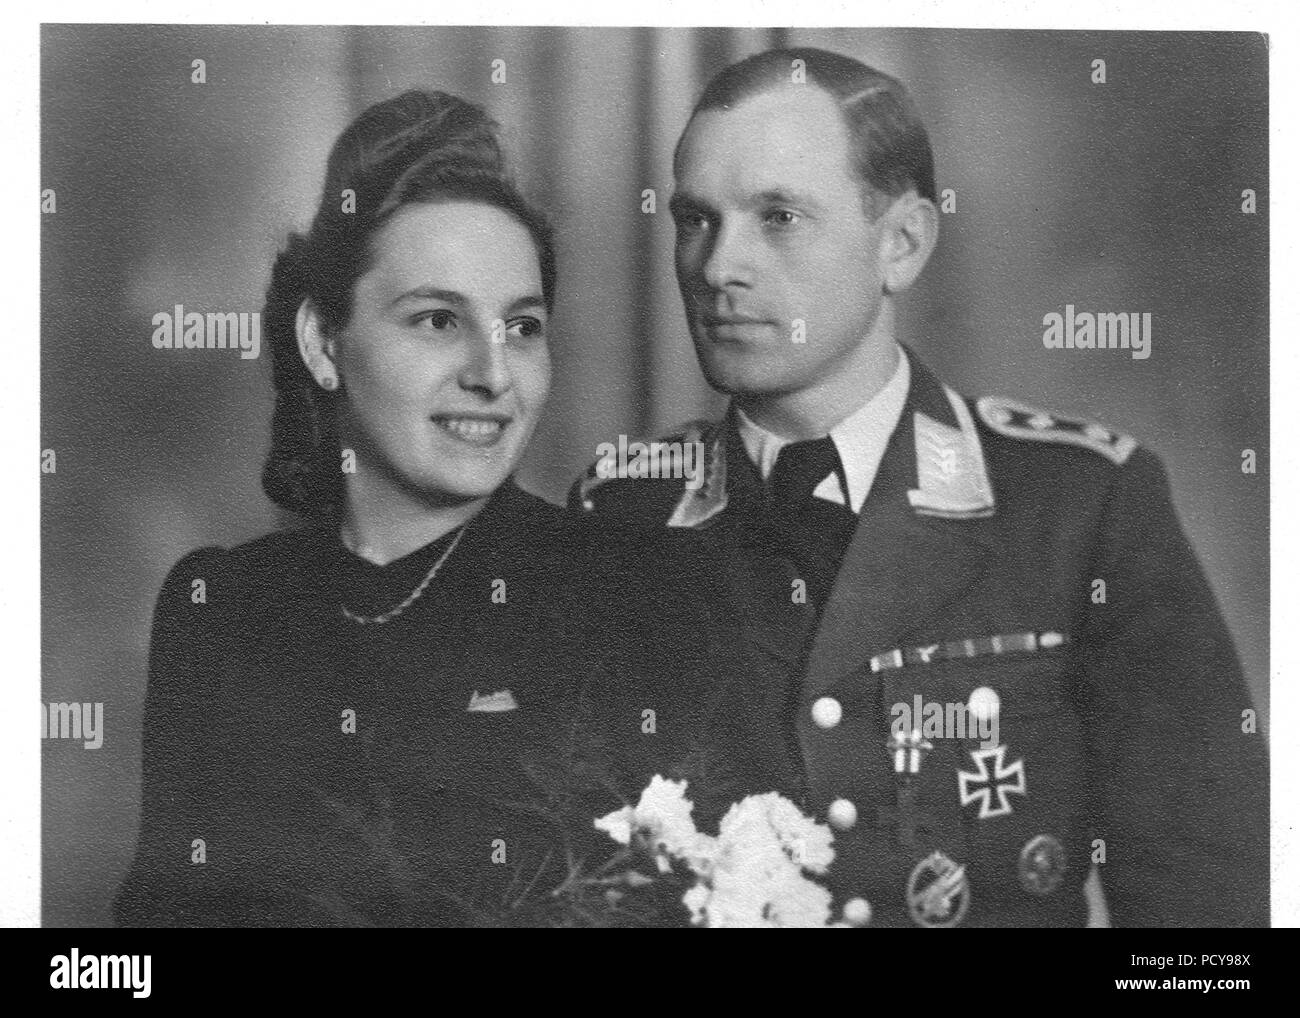 Oberfeldwebel Otto Thomas of 3. Kompanie, Fallschirmjäger-Regiment 2 and his wife Else pose for the camera on their wedding day in December 1942. Otto Thomas wears the ribbons for: the Iron Cross 2nd Class; Long Service Medal IV Class; East Medal; March 13th 1938 Commemorative Medal; October 1st 1938 Commemorative Medal with Prague Castle Bar. On his chest Otto Thomas wears the Italian Croce Al Valor Militare (Cross for Military Valour) with Gallantry Sword on the ribbon; Iron Cross 1st Class; Army Paratrooper Award Badge; Wound Badge in Black. Stock Photo